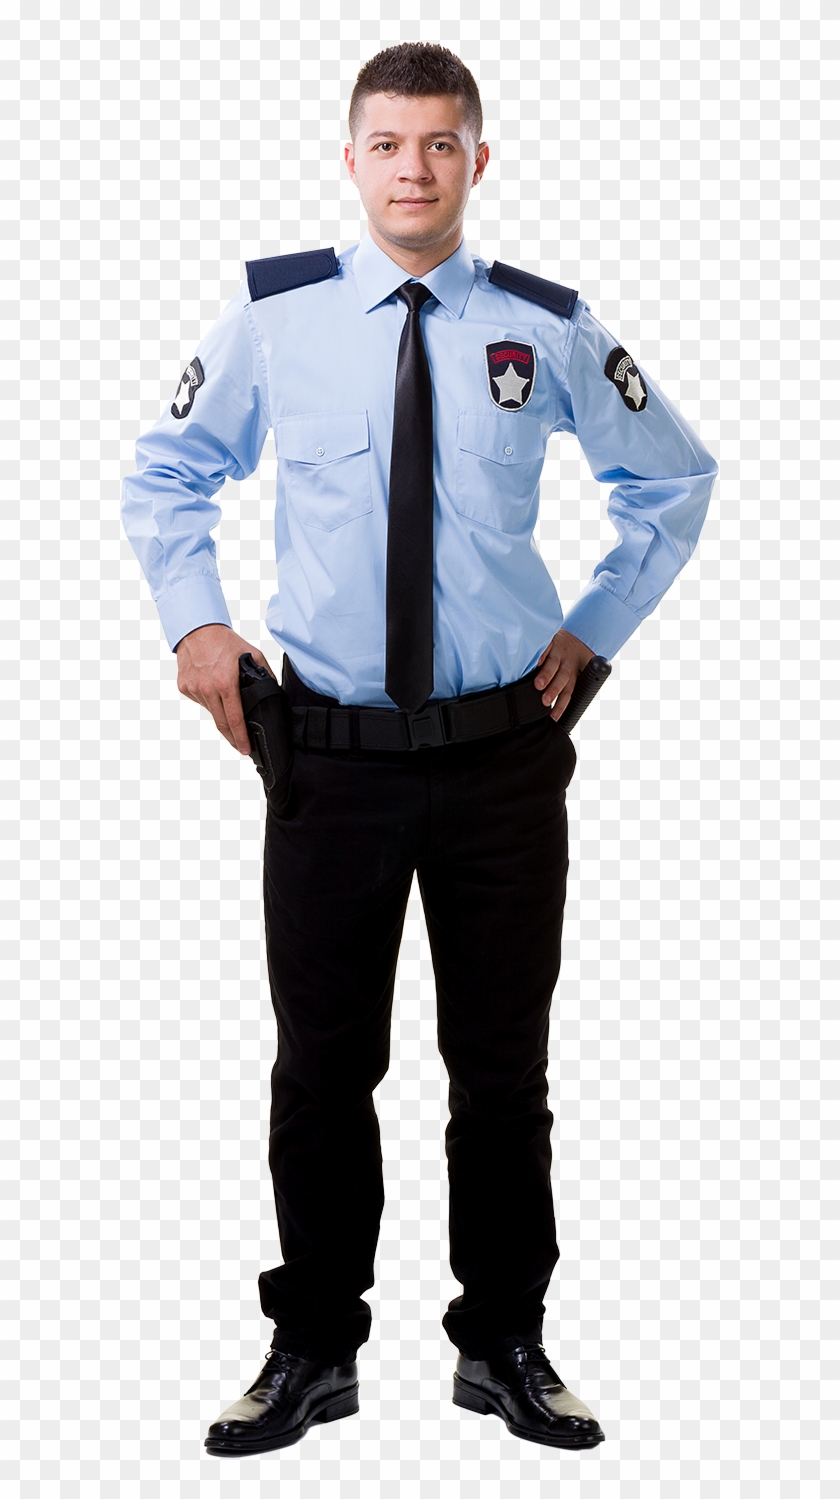 Security Uniforms & Equipment - Security Guard Clipart #3485899